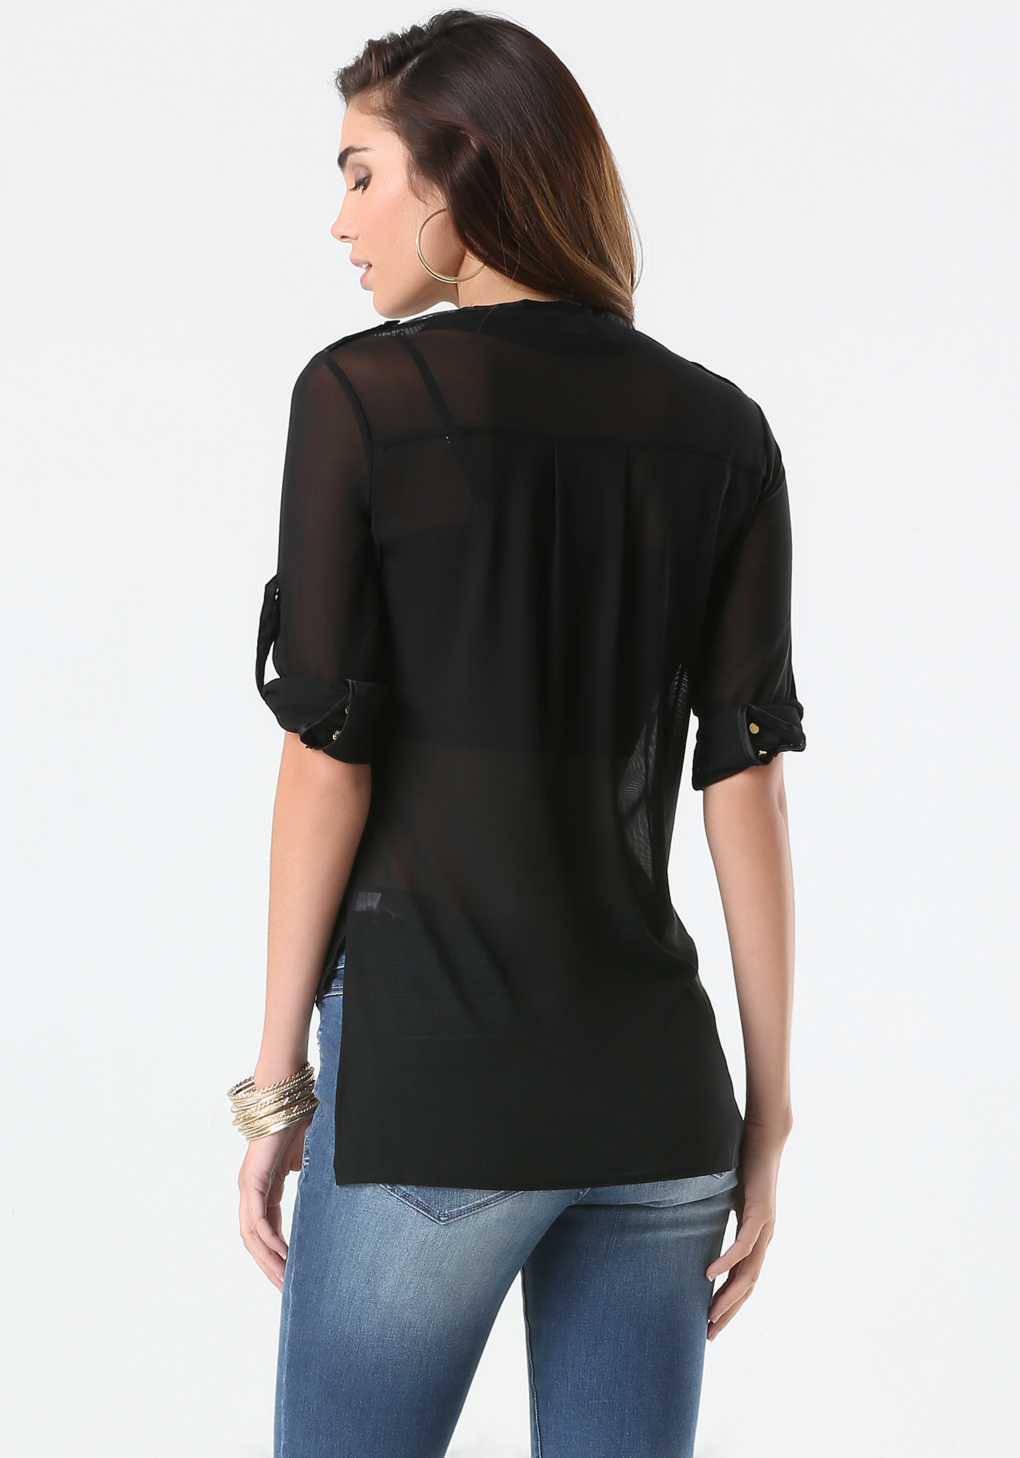 Lyst - Bebe Mesh Front Button Shirt in Black